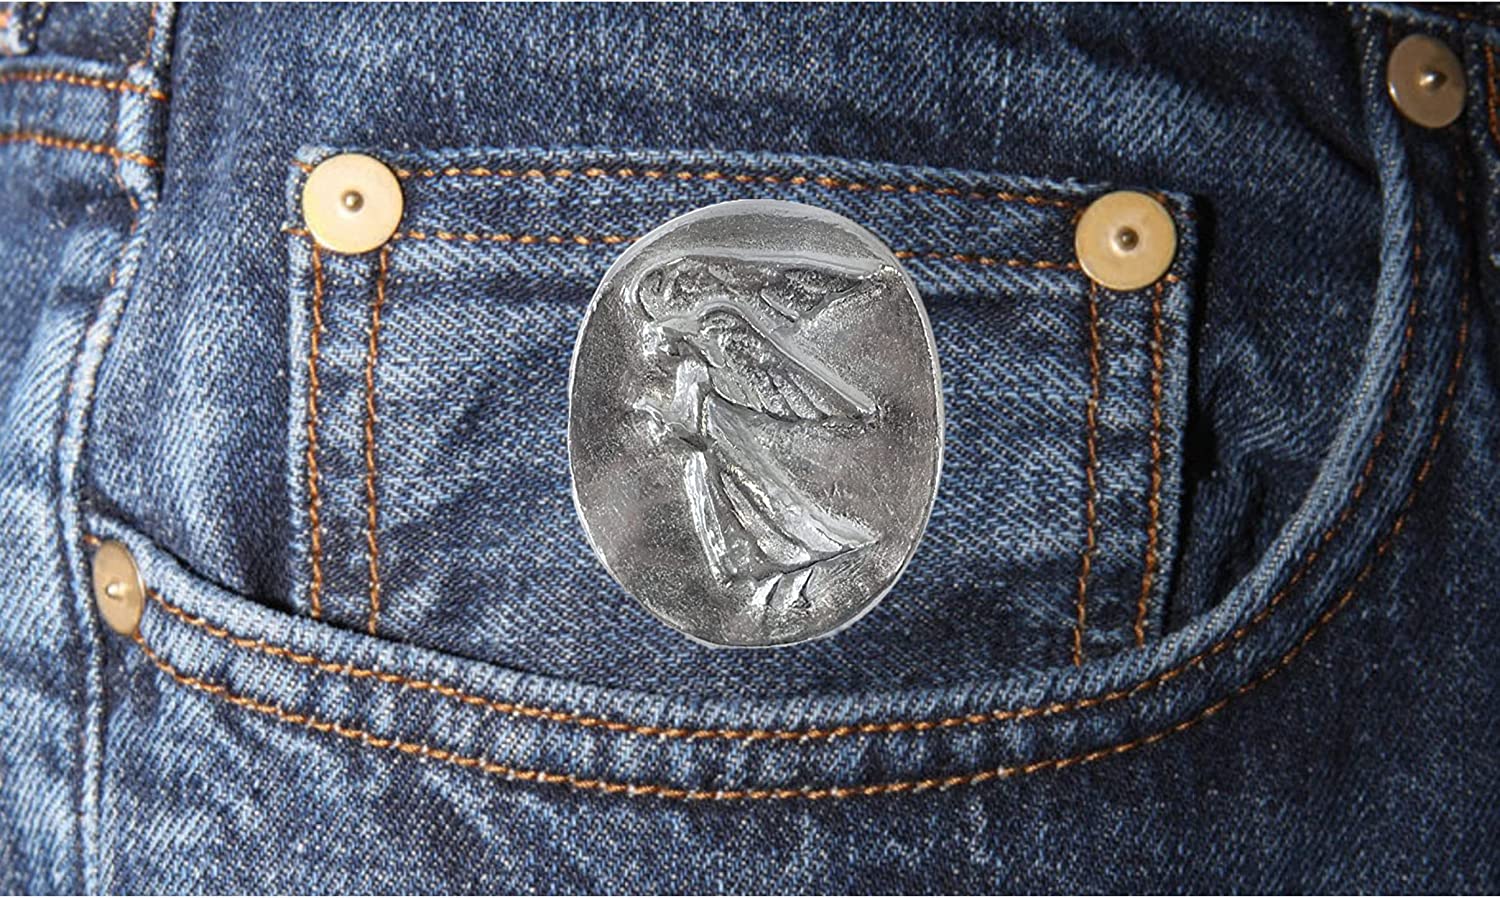 Guardian Angel' Protection Coin With Message - MBOS London